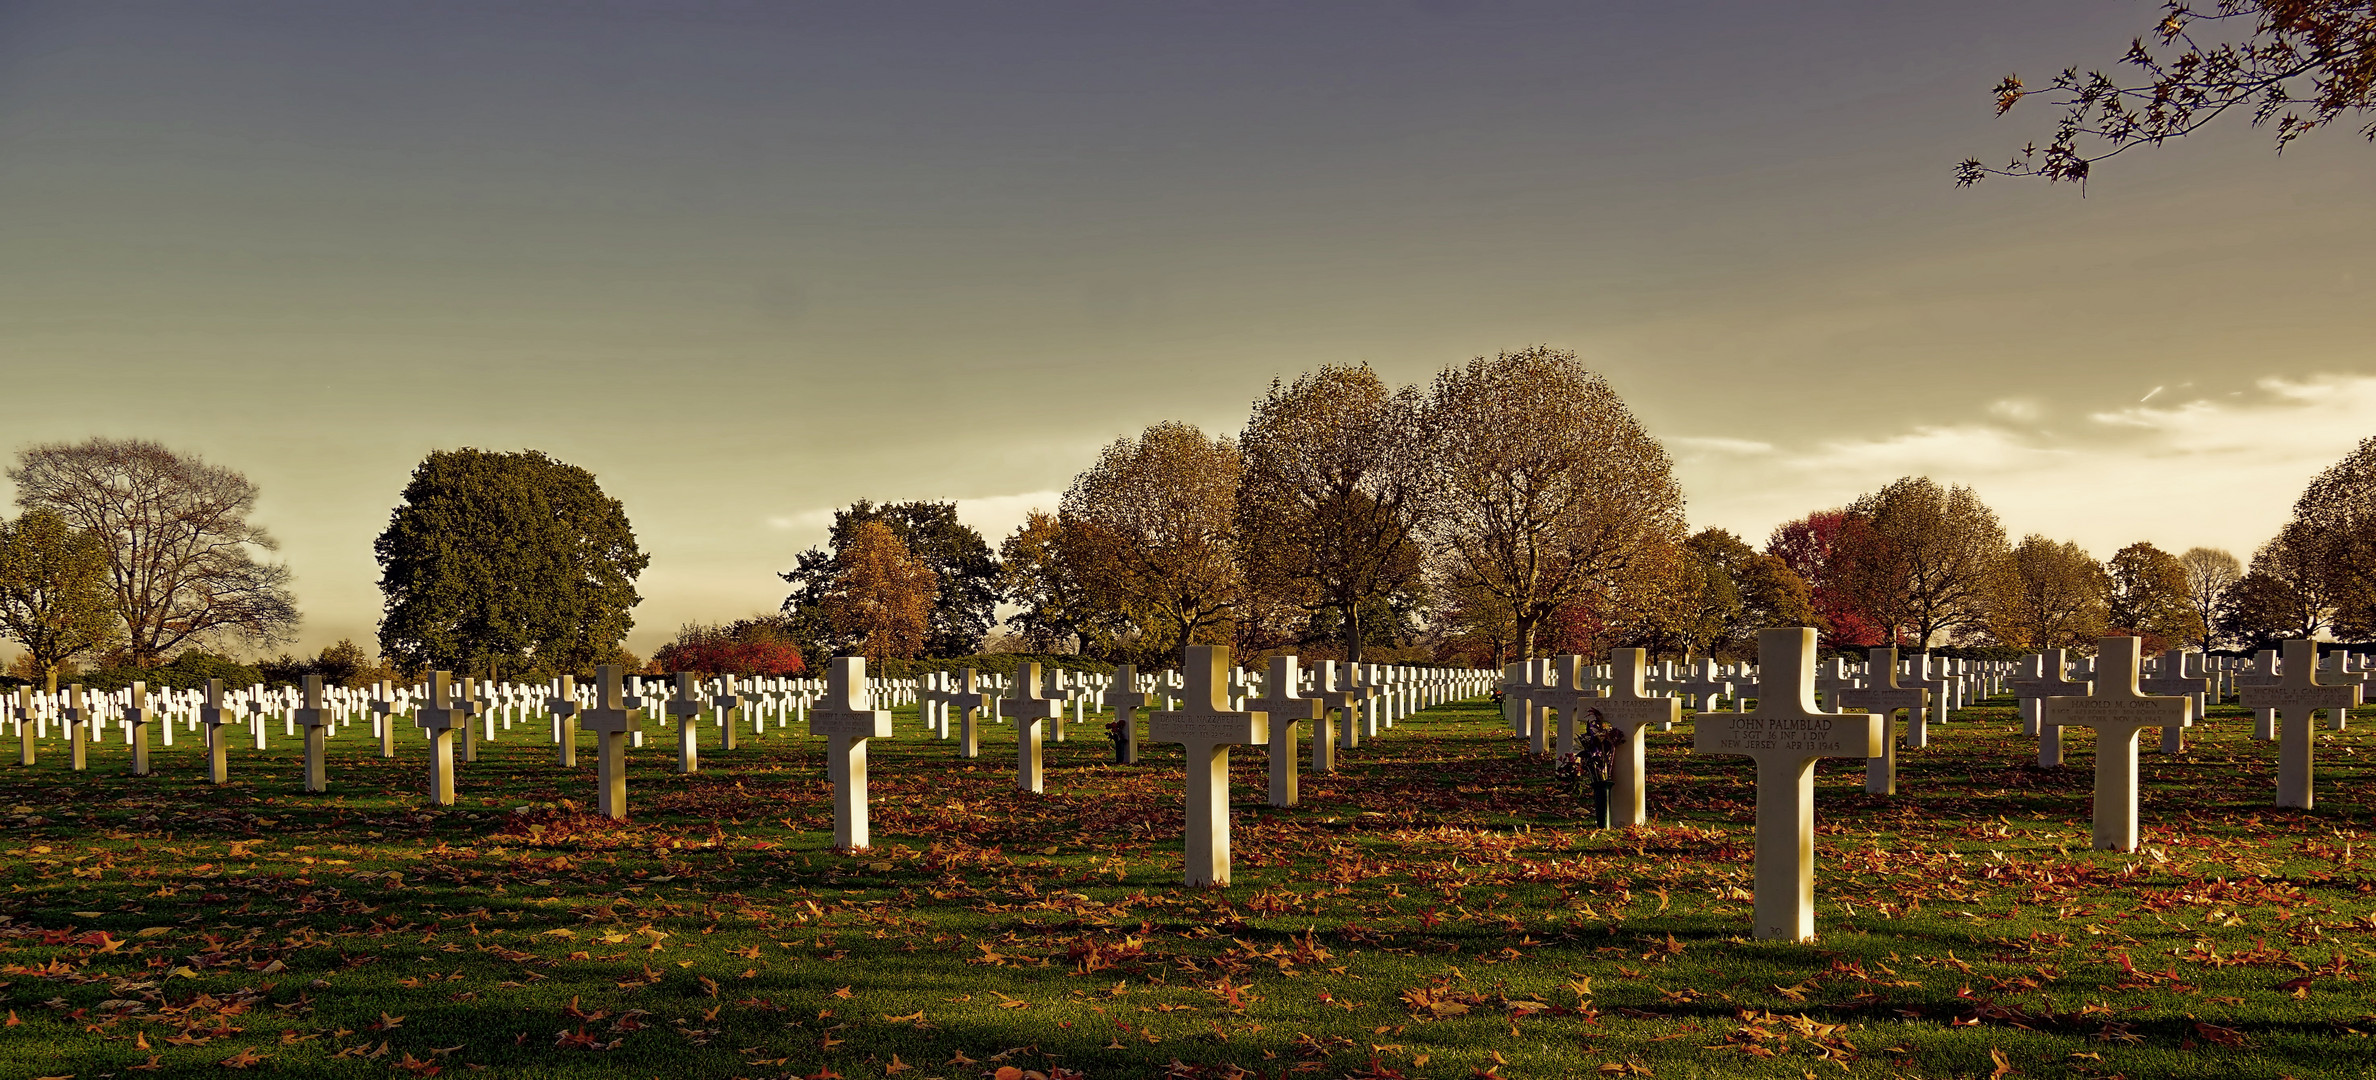  Netherlands American Cementery and Memorial